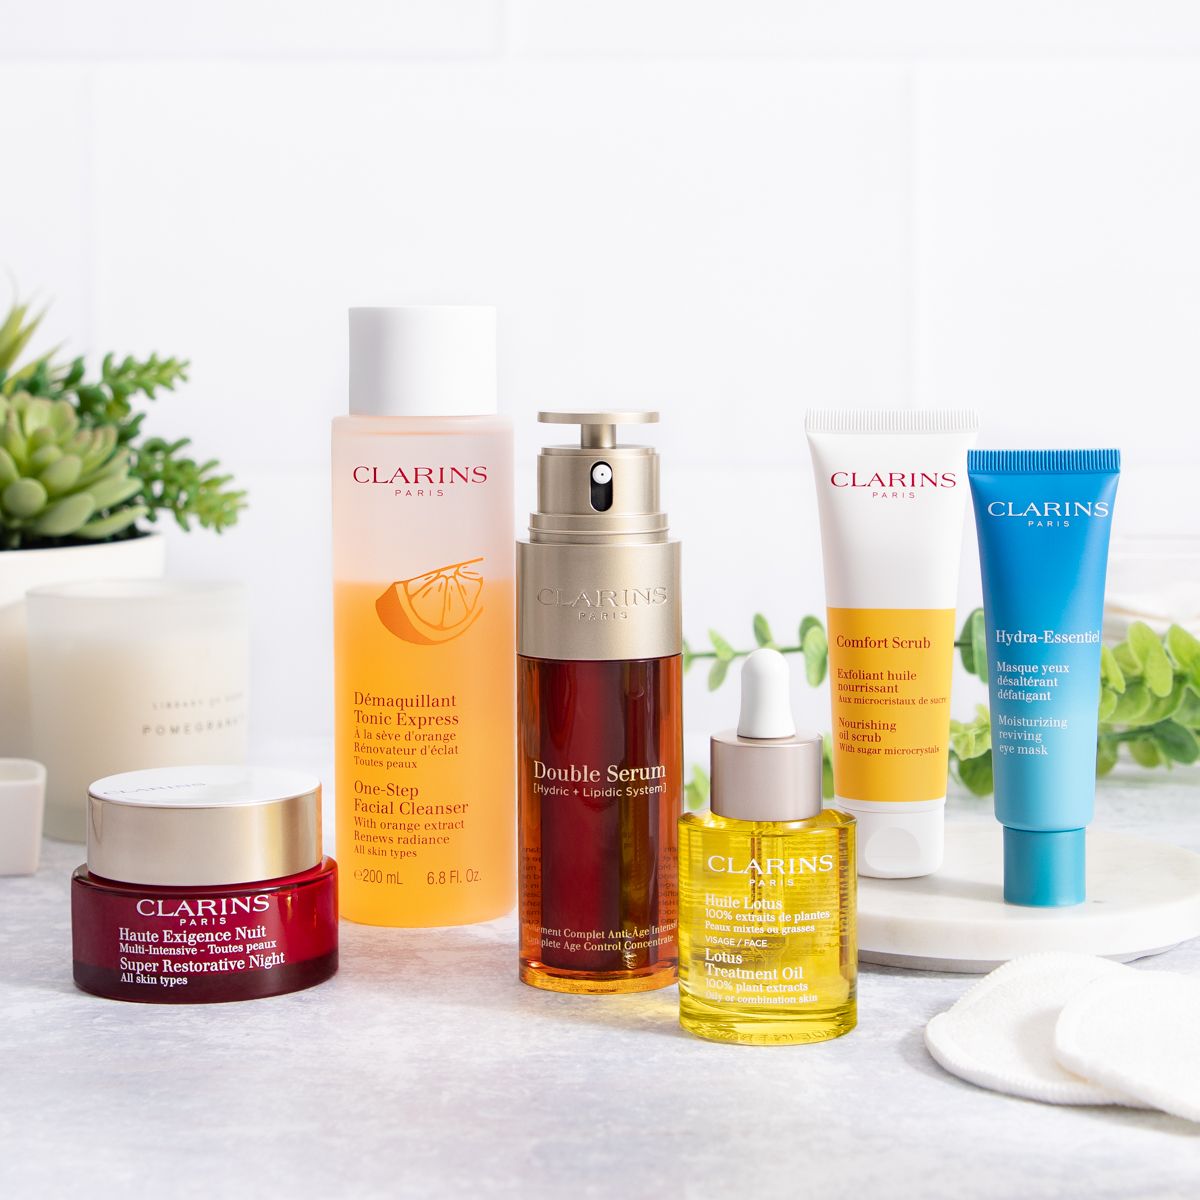 Clarins virtual beauty event